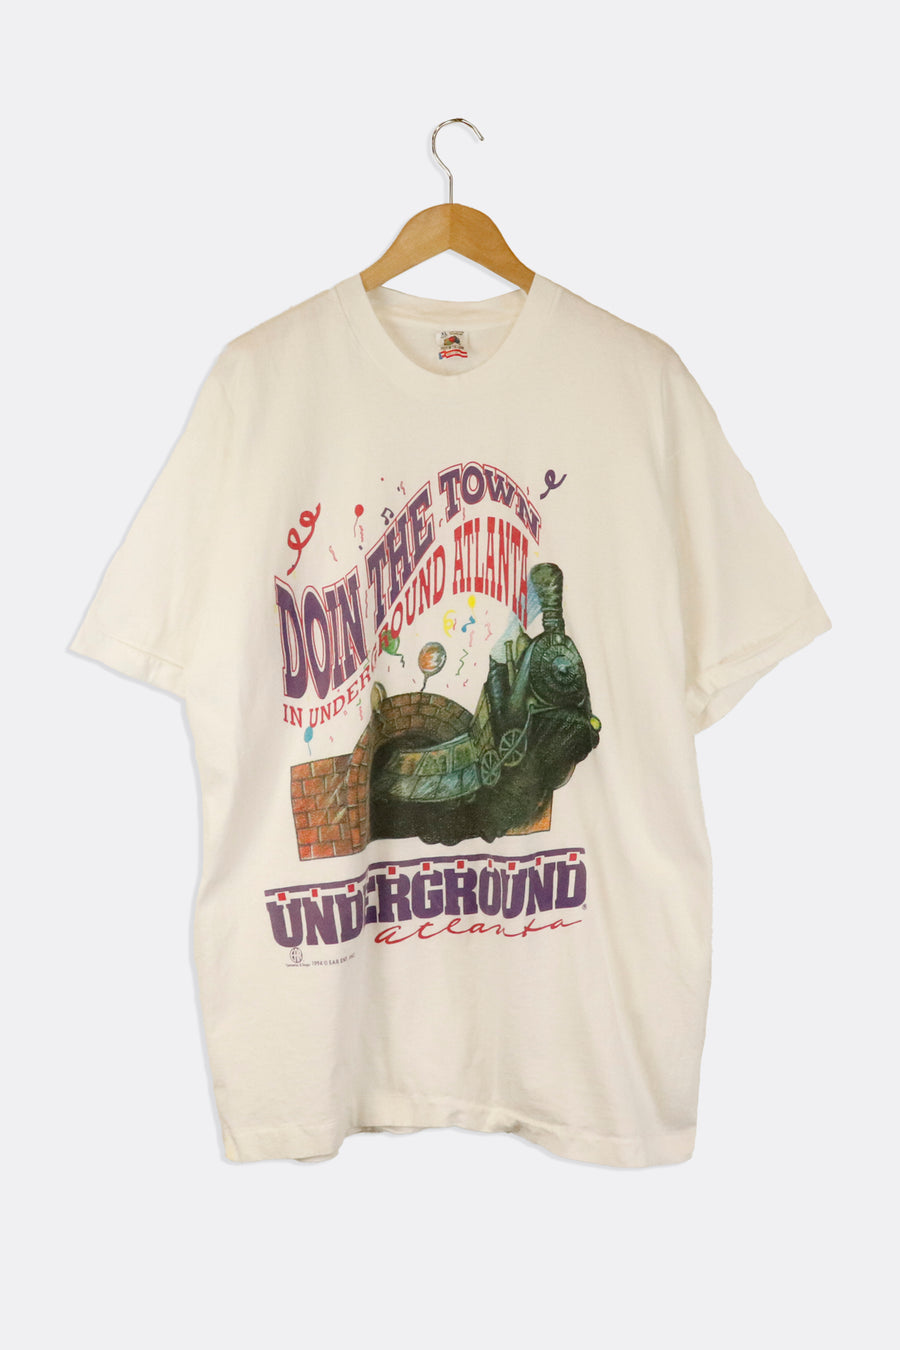 Vintage 1994 Doin The Town In The Underground Altanta Train And Tunnel With Ballons And Music Notes Graphic T Shirt Sz XL